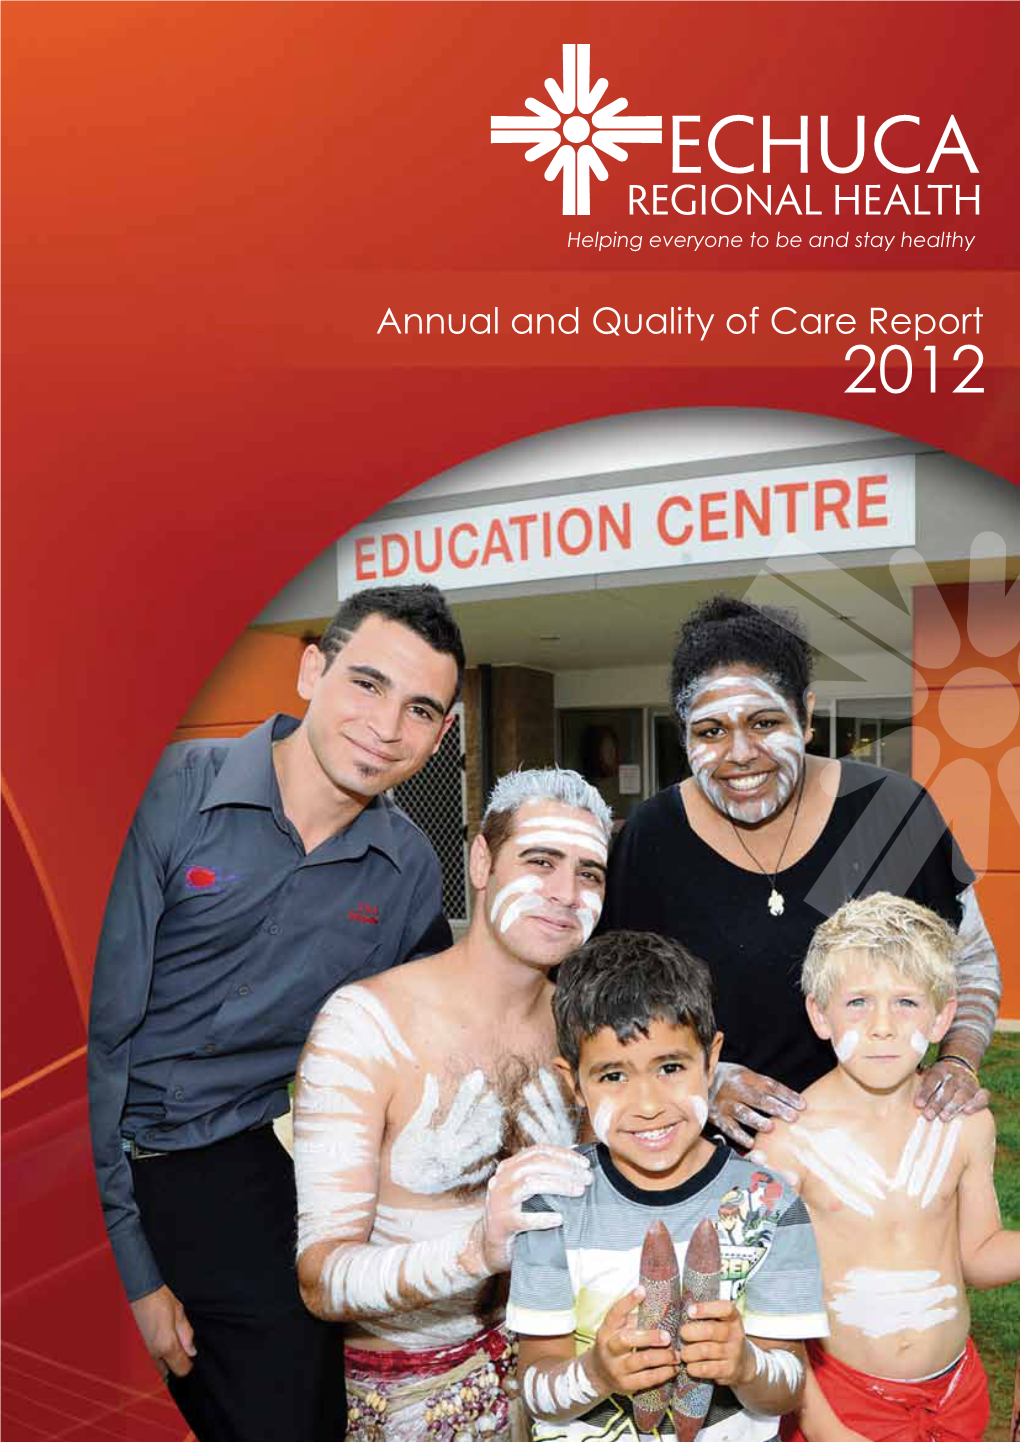 Annual and Quality of Care Report 2012 Echuca Regional Health Purpose ‘Helping Everyone to Be and Stay Healthy’